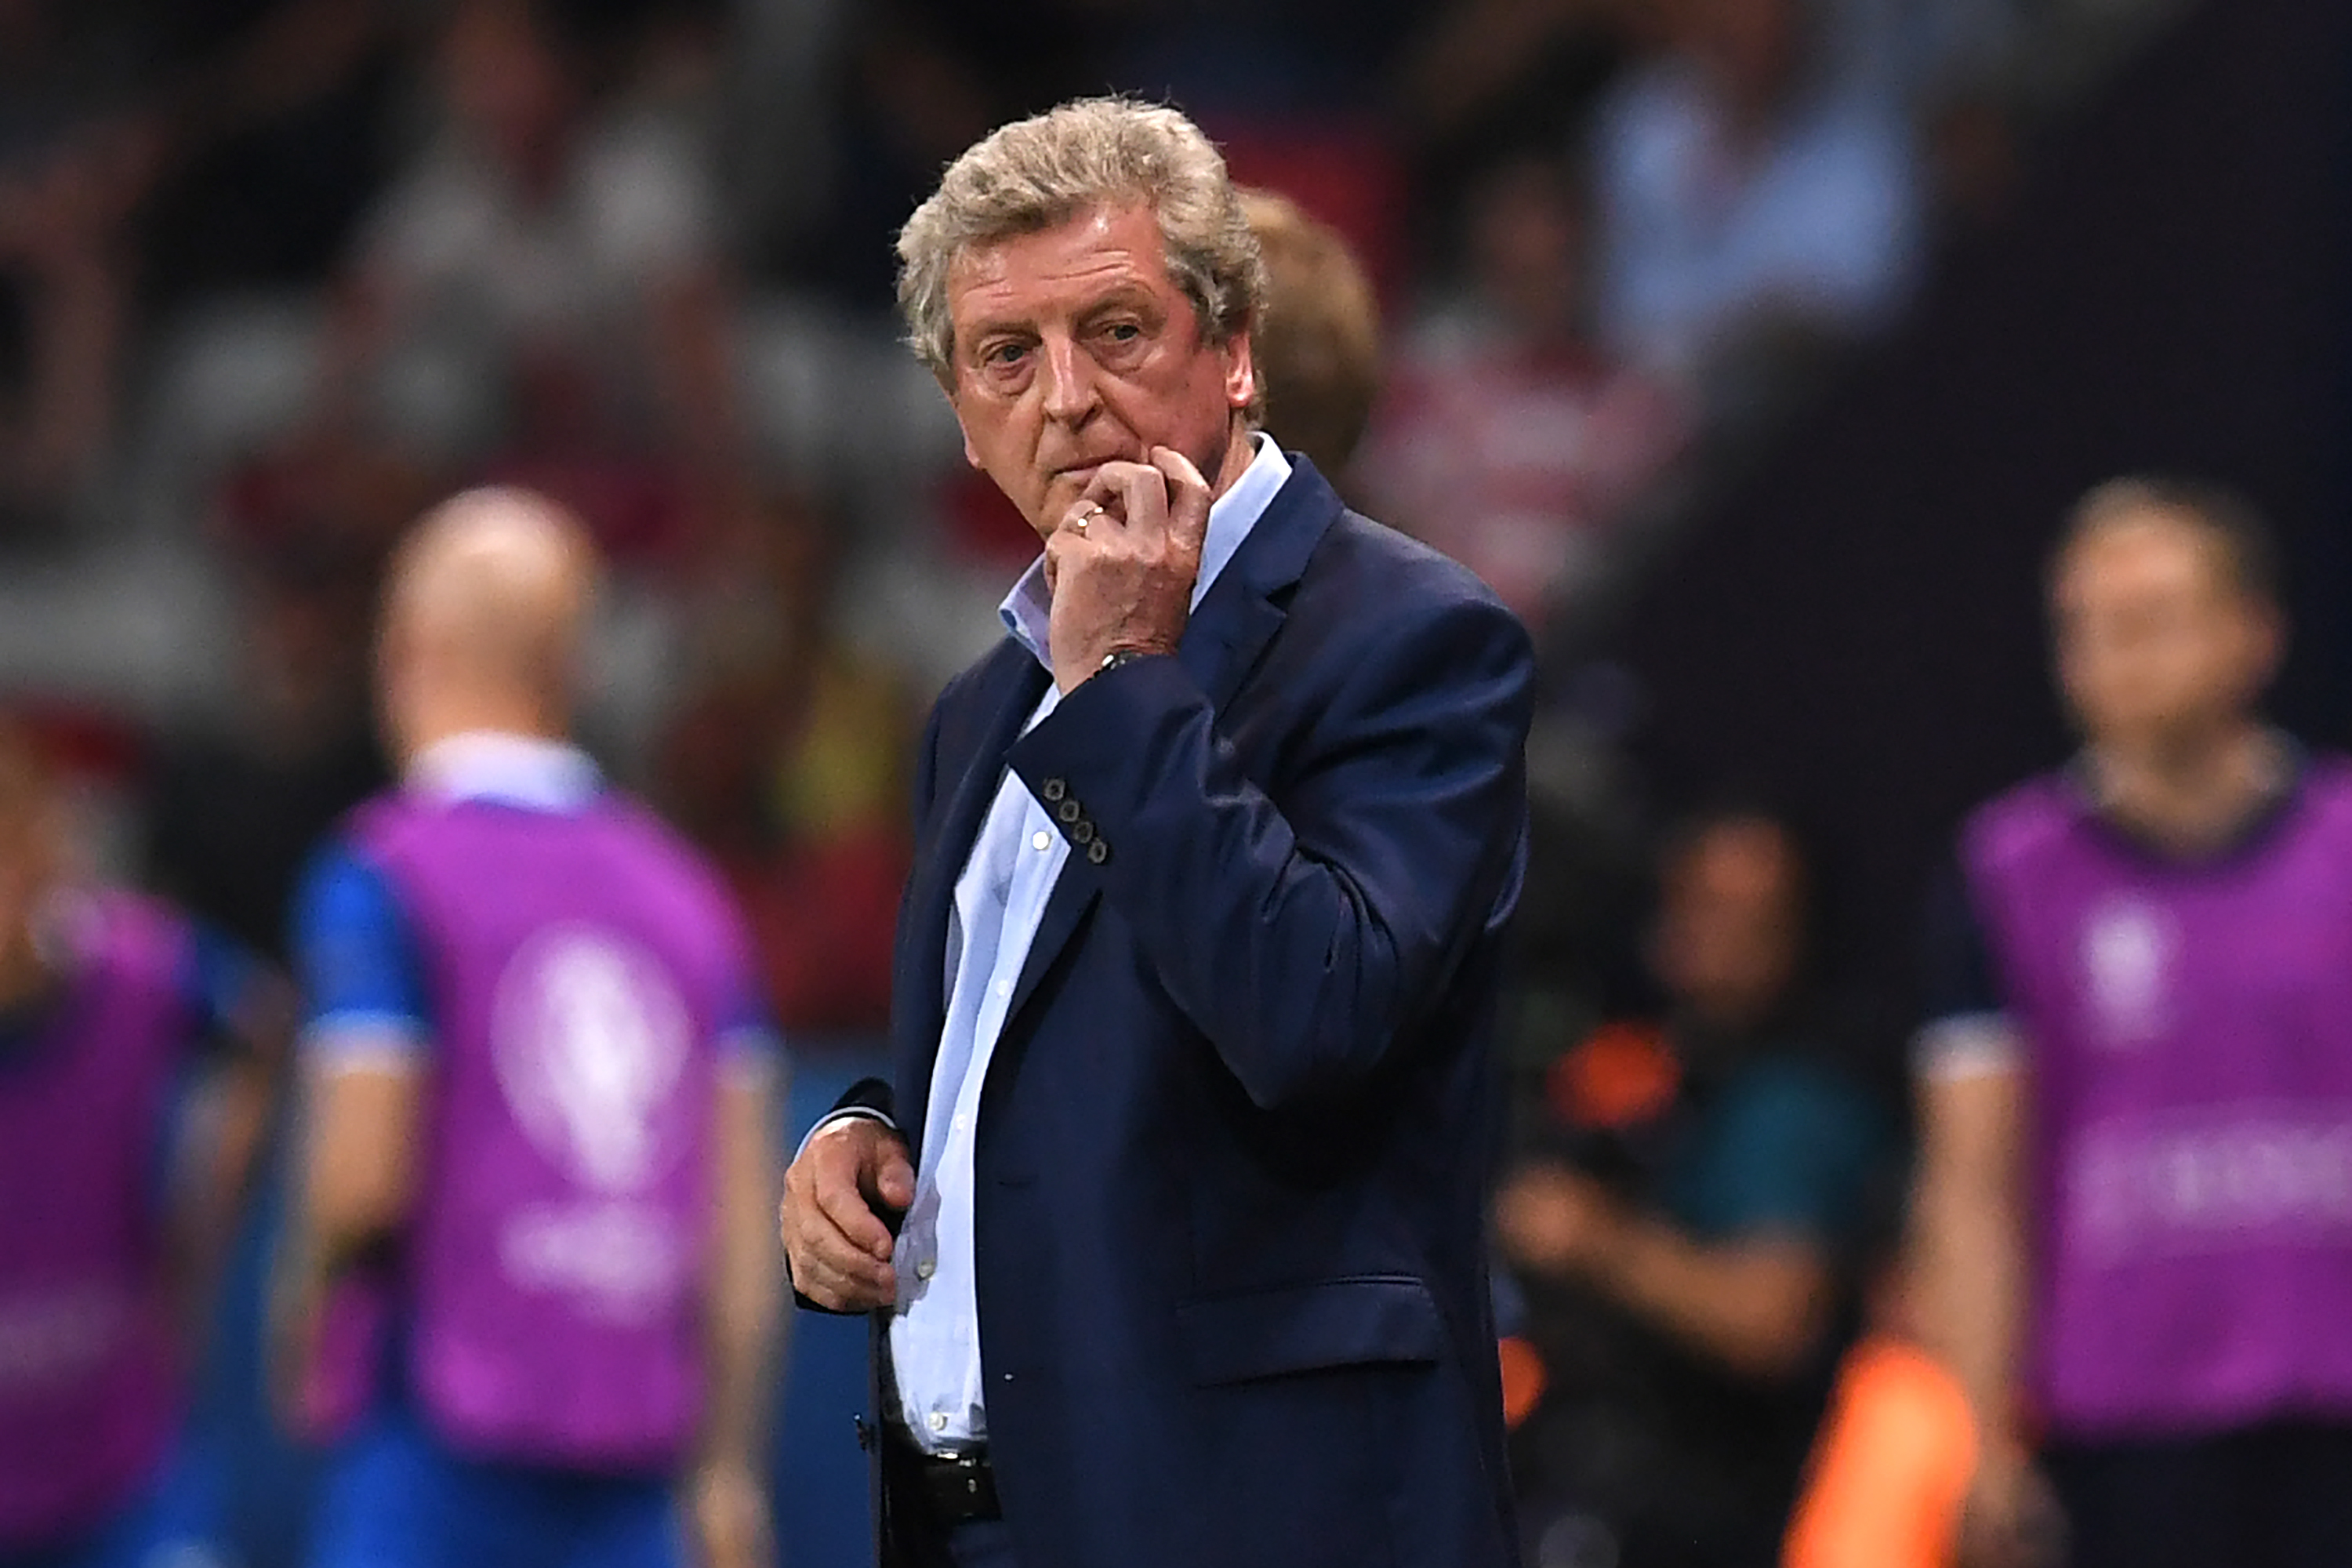 England's coach Roy Hodgson reacts during Euro 2016 round of 16 football match between England and Iceland at the Allianz Riviera stadium in Nice on June 27, 2016.   / AFP / PAUL ELLIS        (Photo credit should read PAUL ELLIS/AFP/Getty Images)